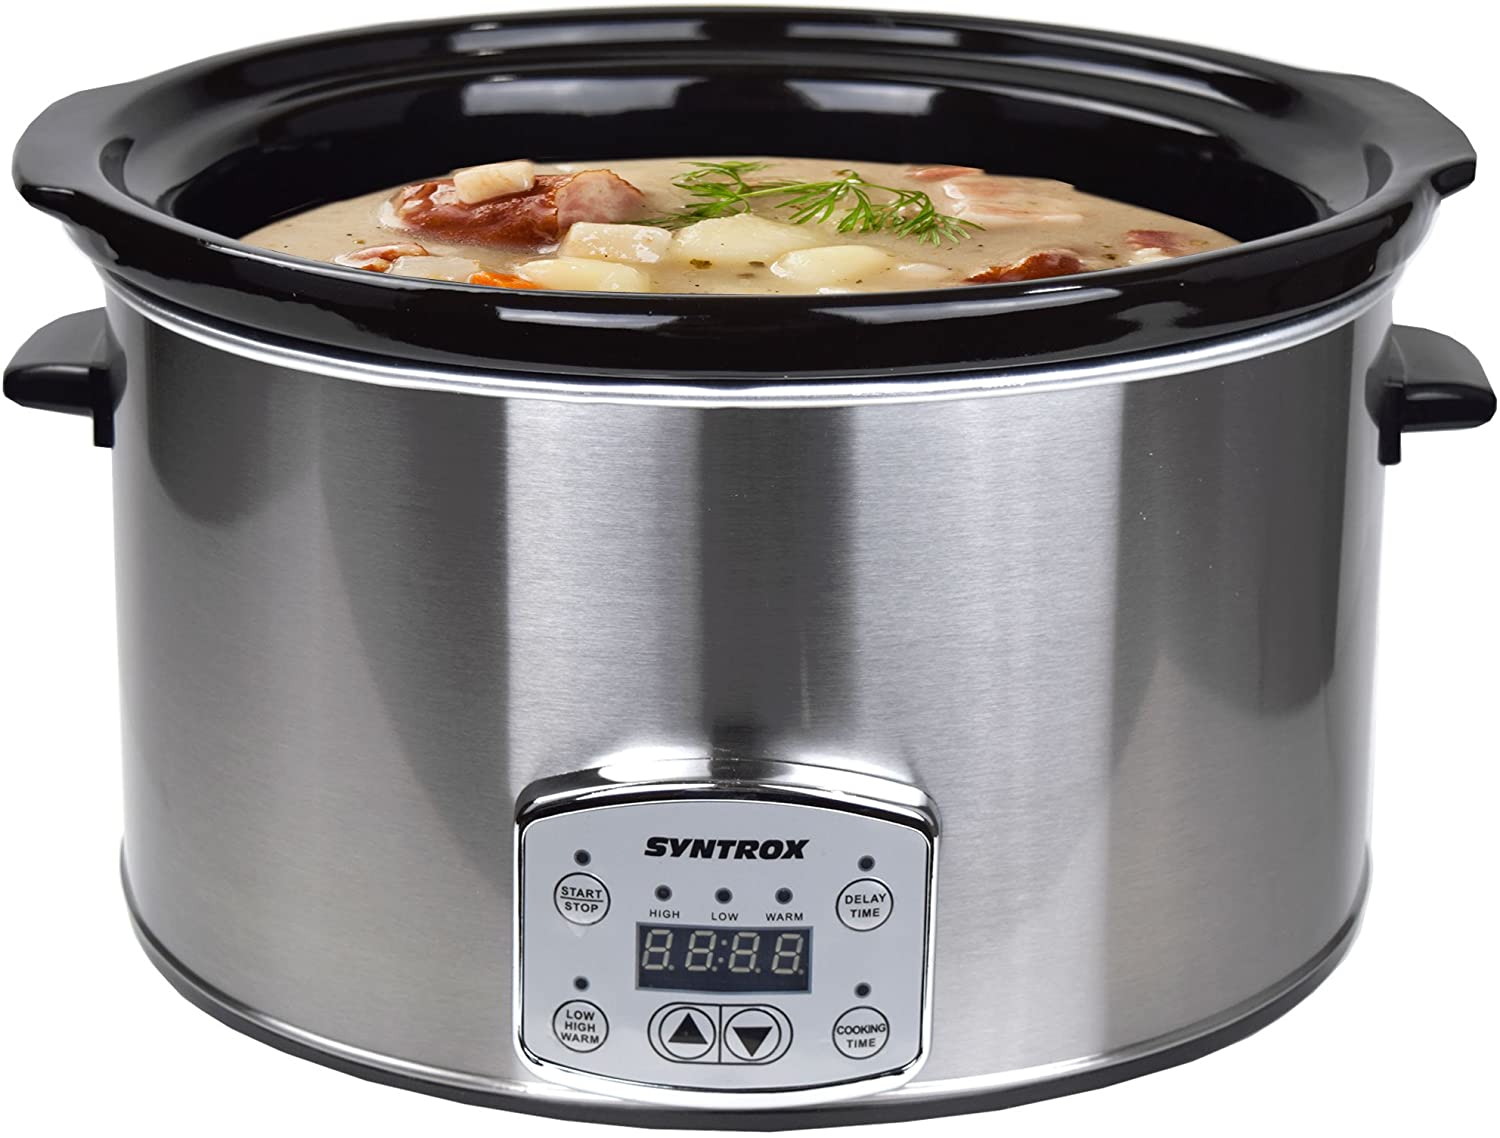 Syntrox Germany 8.0 litre digital stainless steel slow cooker with timer and warming function